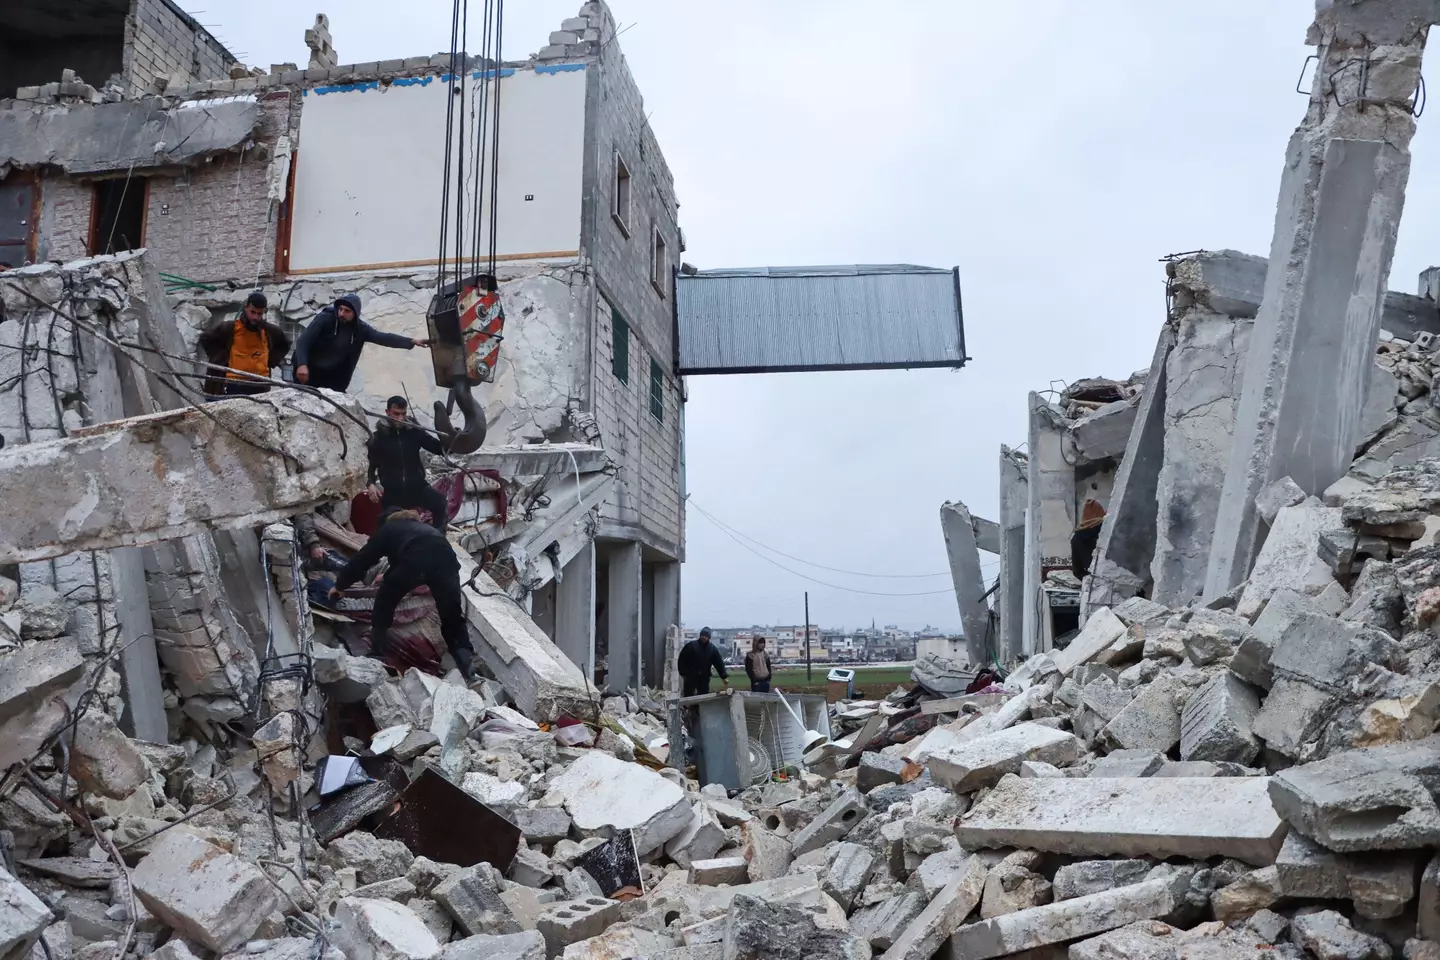 Syrian rescue teams search for victims in the rubble following an earthquake in the northwestern, rebel-held Idlib province.